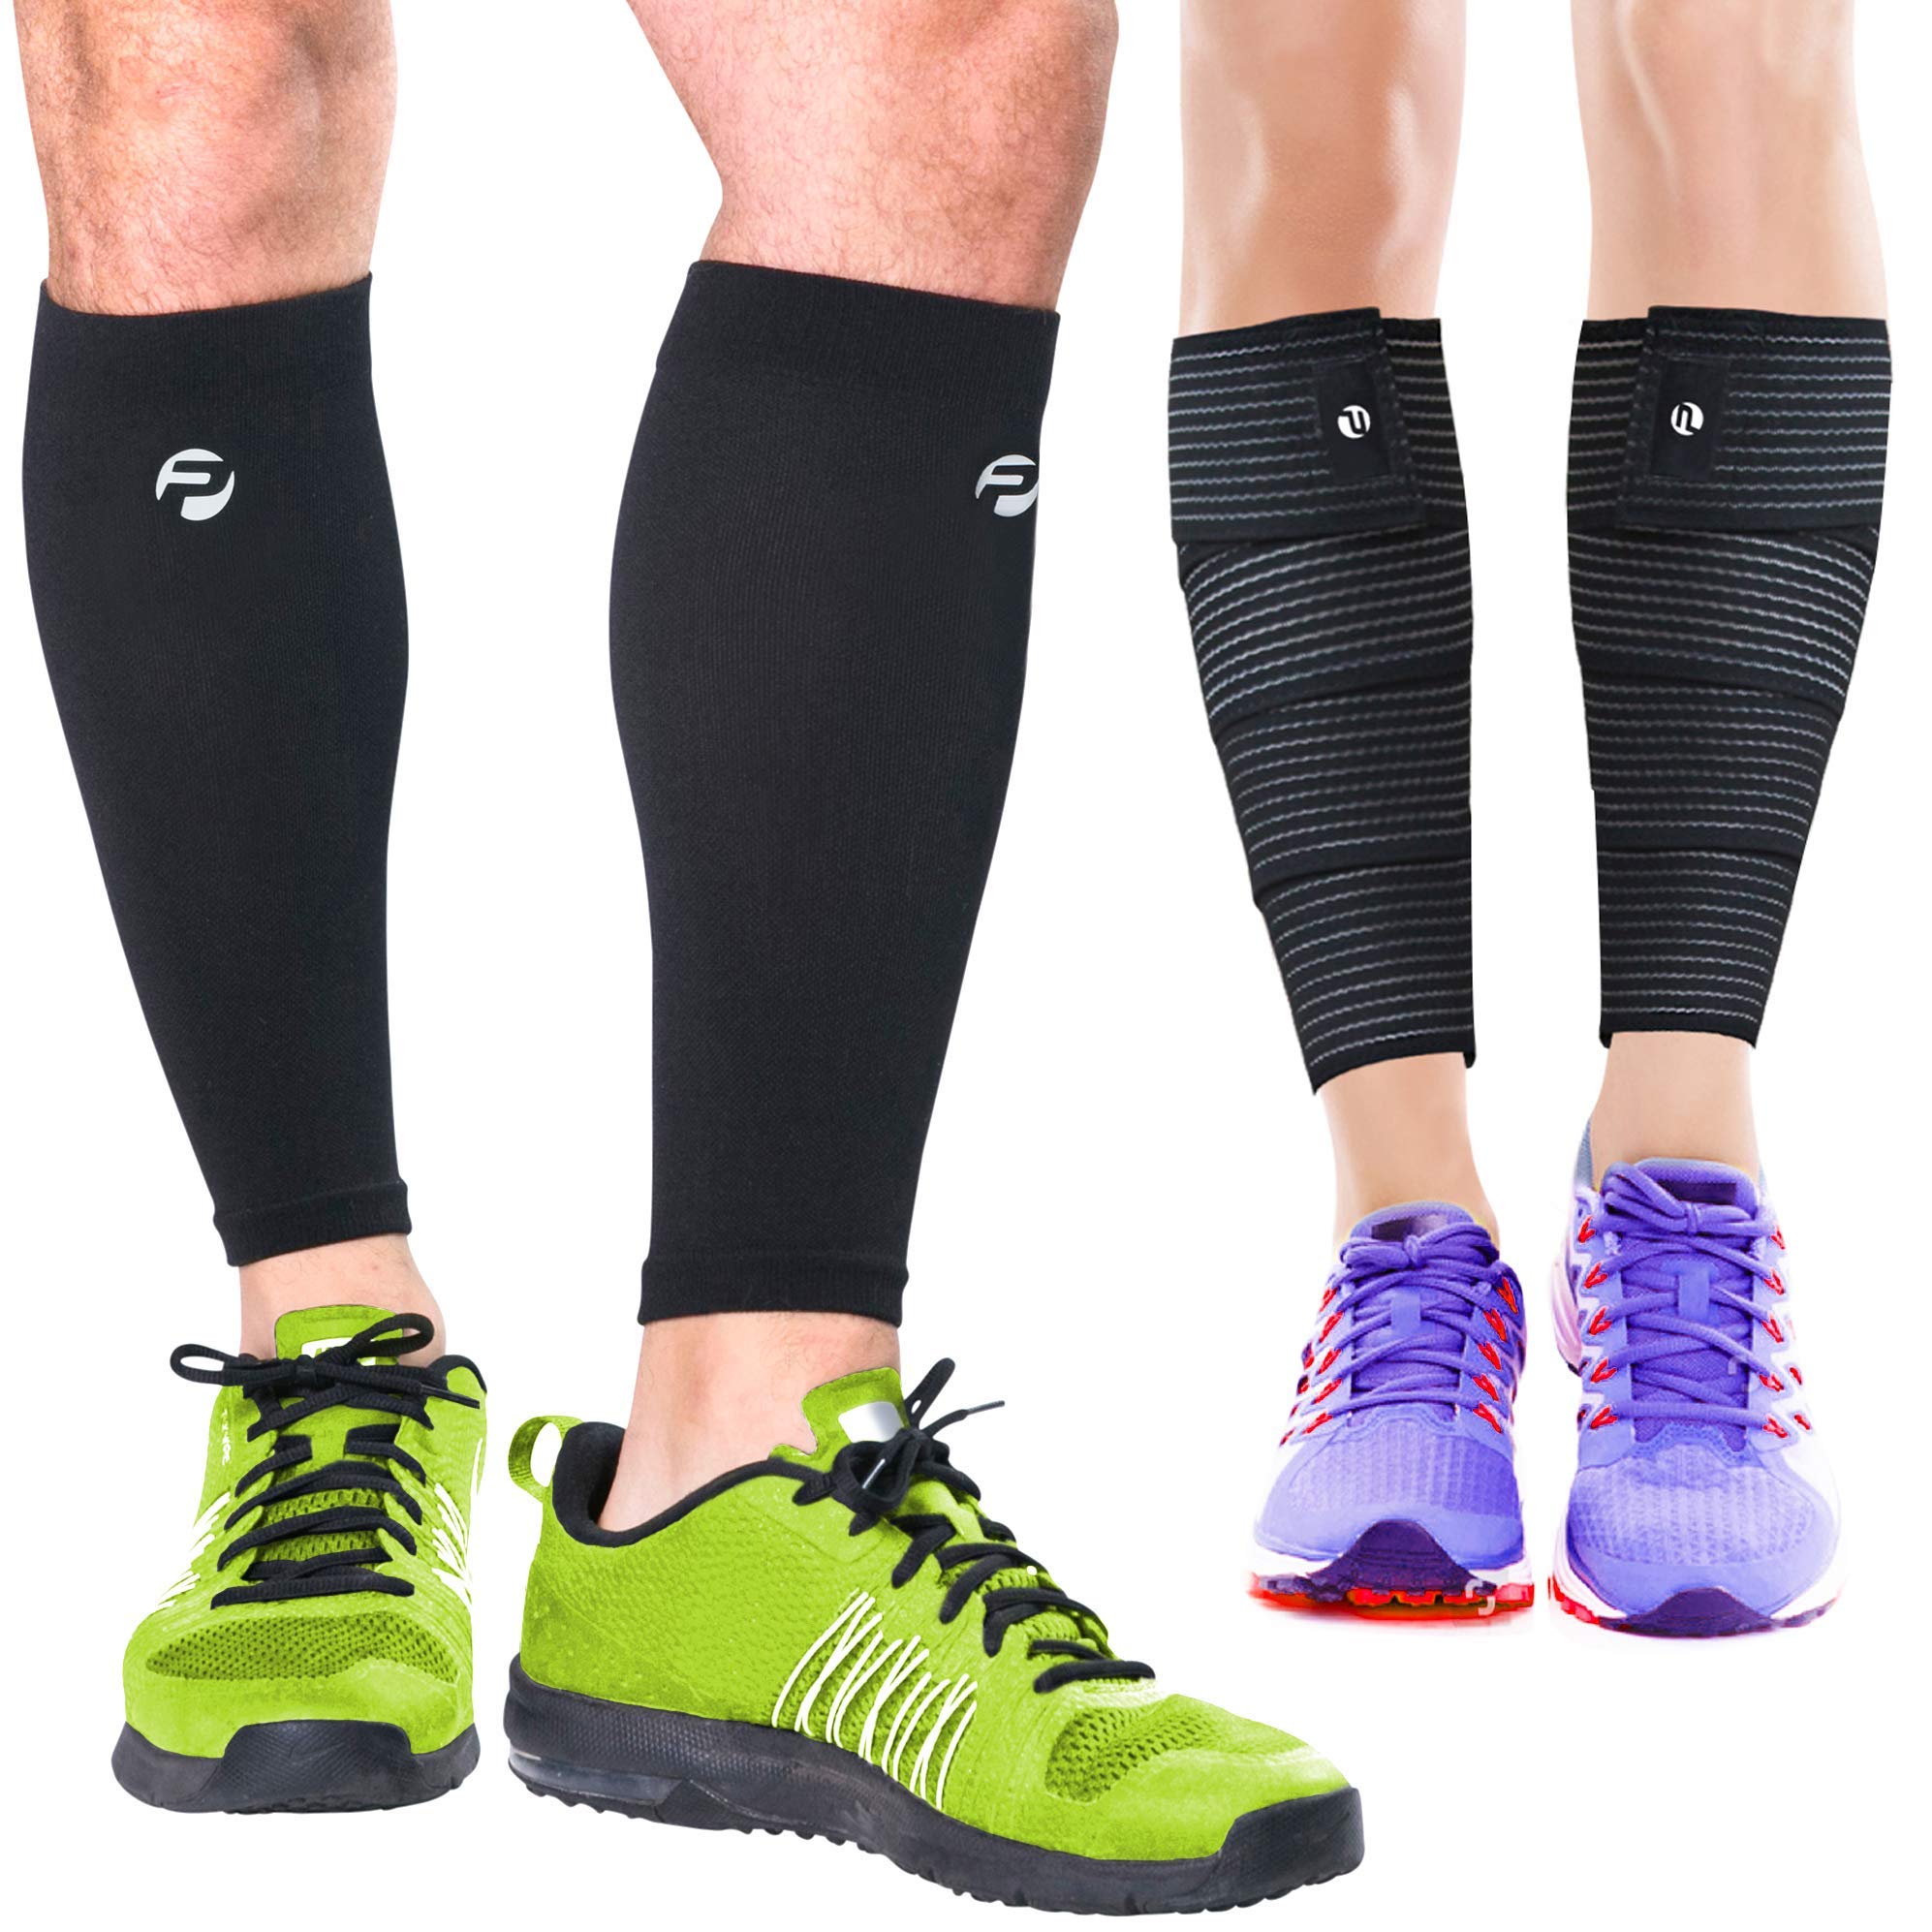 Calf Compression Sleeves and Leg Wraps (4 Piece) Shin Splint Support, Calve  Guards for Men and Women - Braces Provide Healthy Circulation Pain Relief  for Running, Basketball, Cycling, Maternity Small - Medium